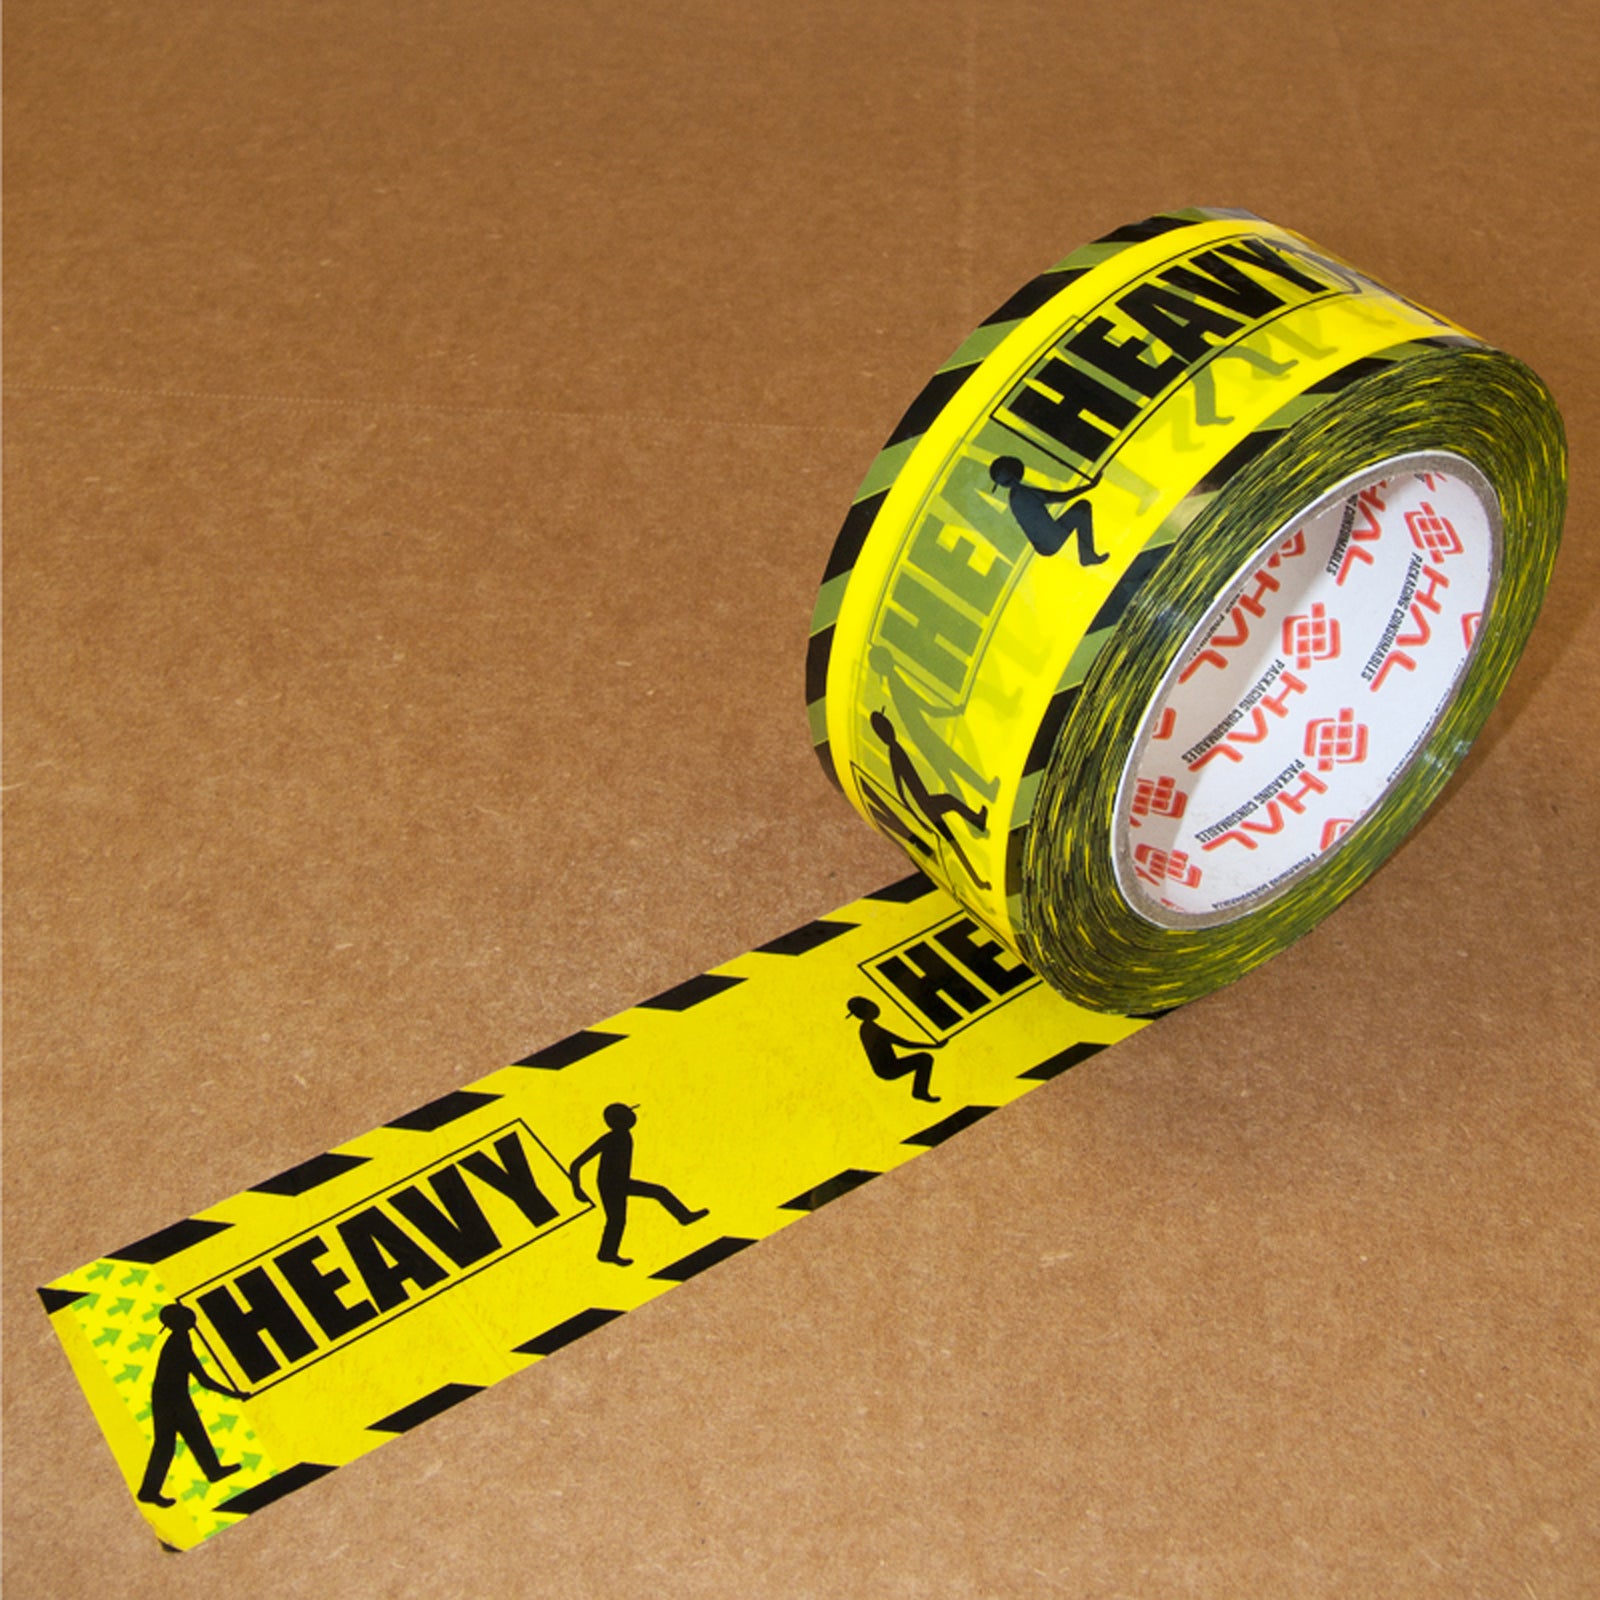 yellow and black printed packaging tape with two men figures holding a sign that says heavy on the tape on top of brown box